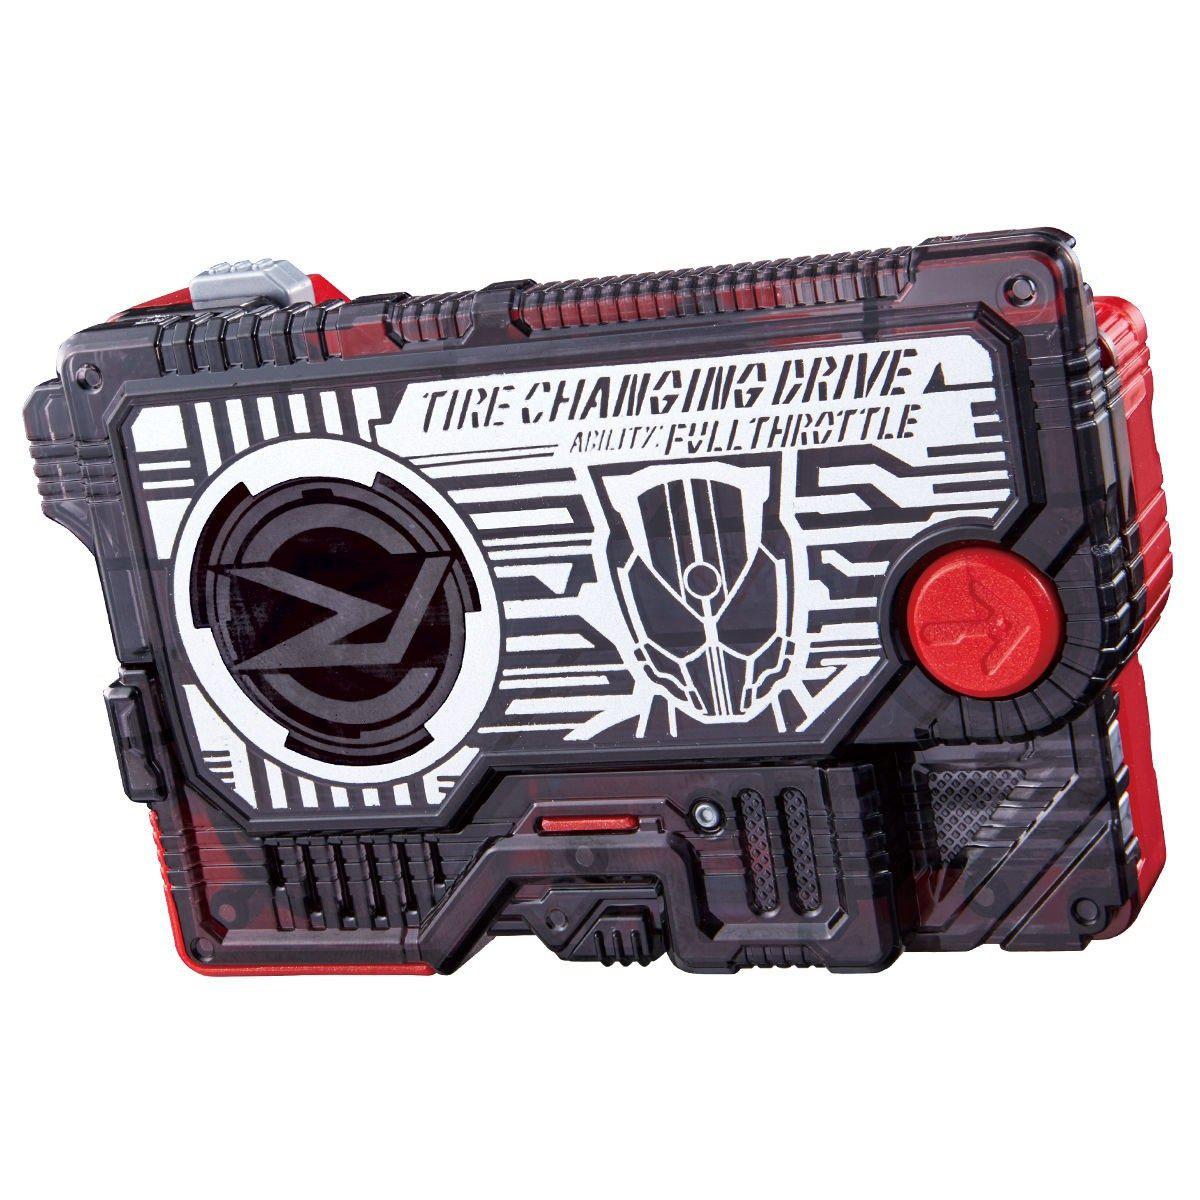 Kamen Rider Zero One DX Tire Changing Drive Progrise Key-Bandai-Ace Cards & Collectibles